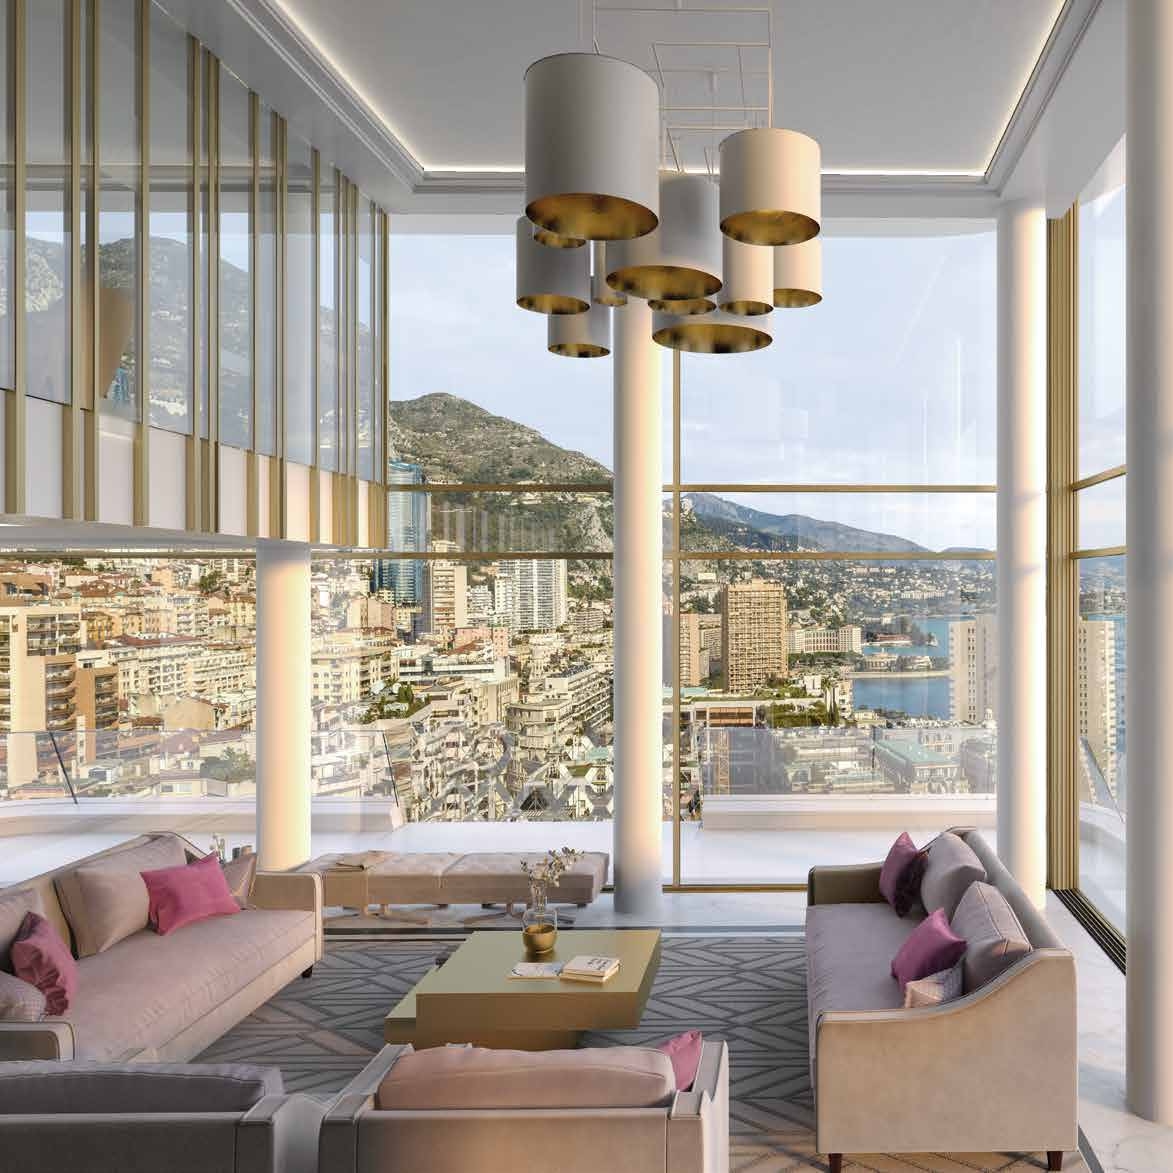 The Penthouse of the 26 Carré d'Or Residence in Monte-Carlo Monaco. Built by Group Segond